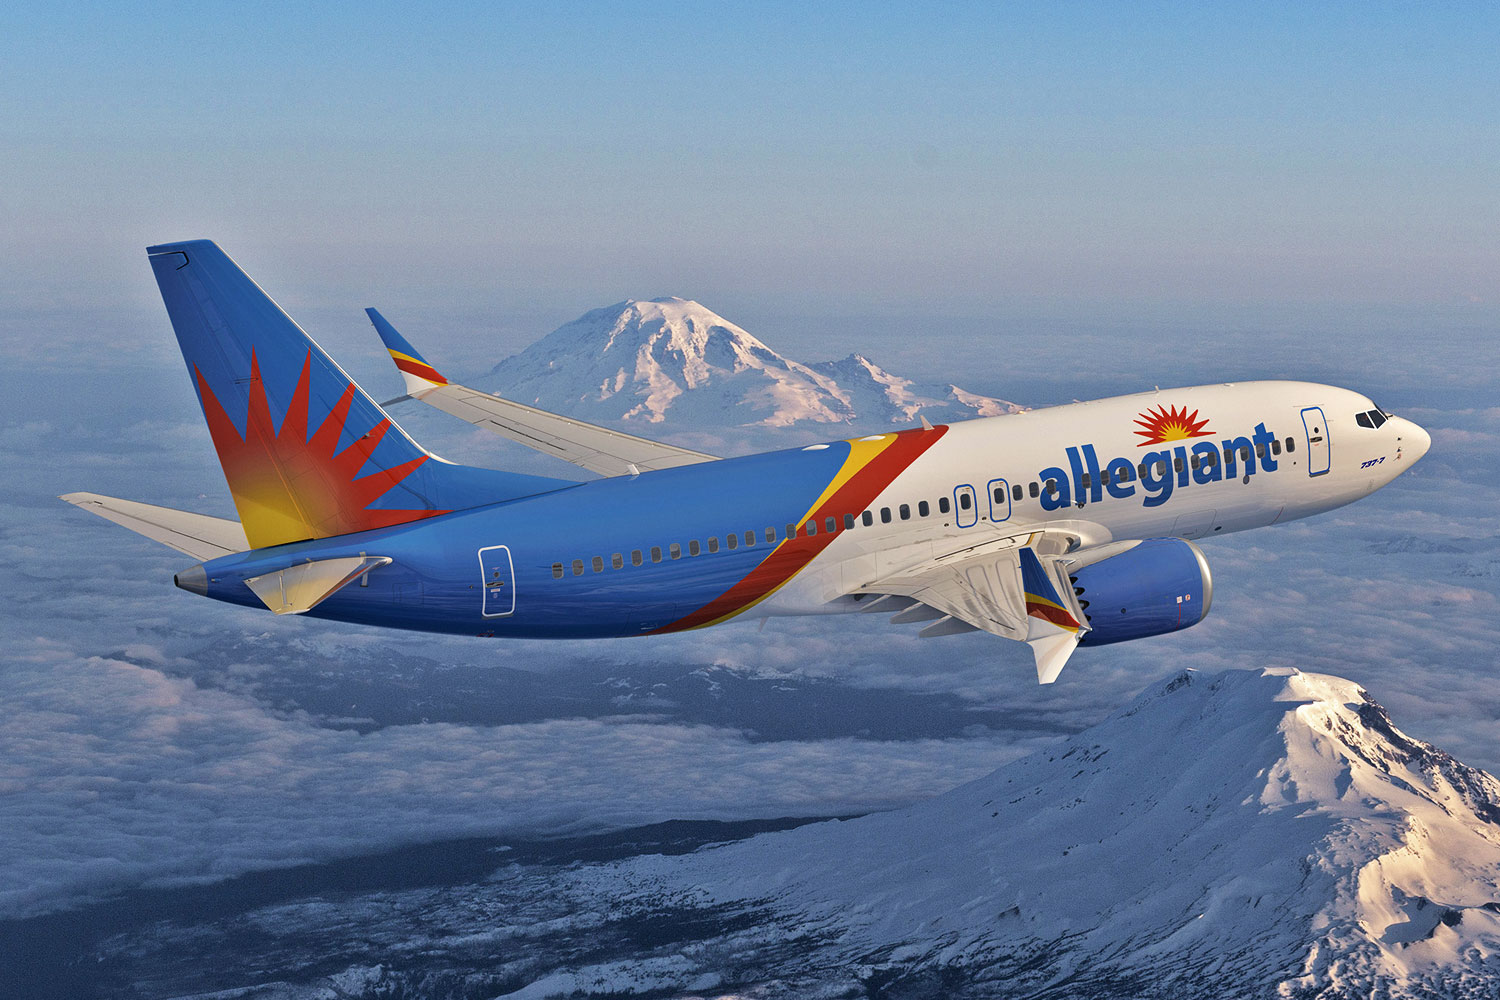 Allegiant Air confirms order for Boeing 737 MAX 7 and MAX 8-200 jets - Air  Data News